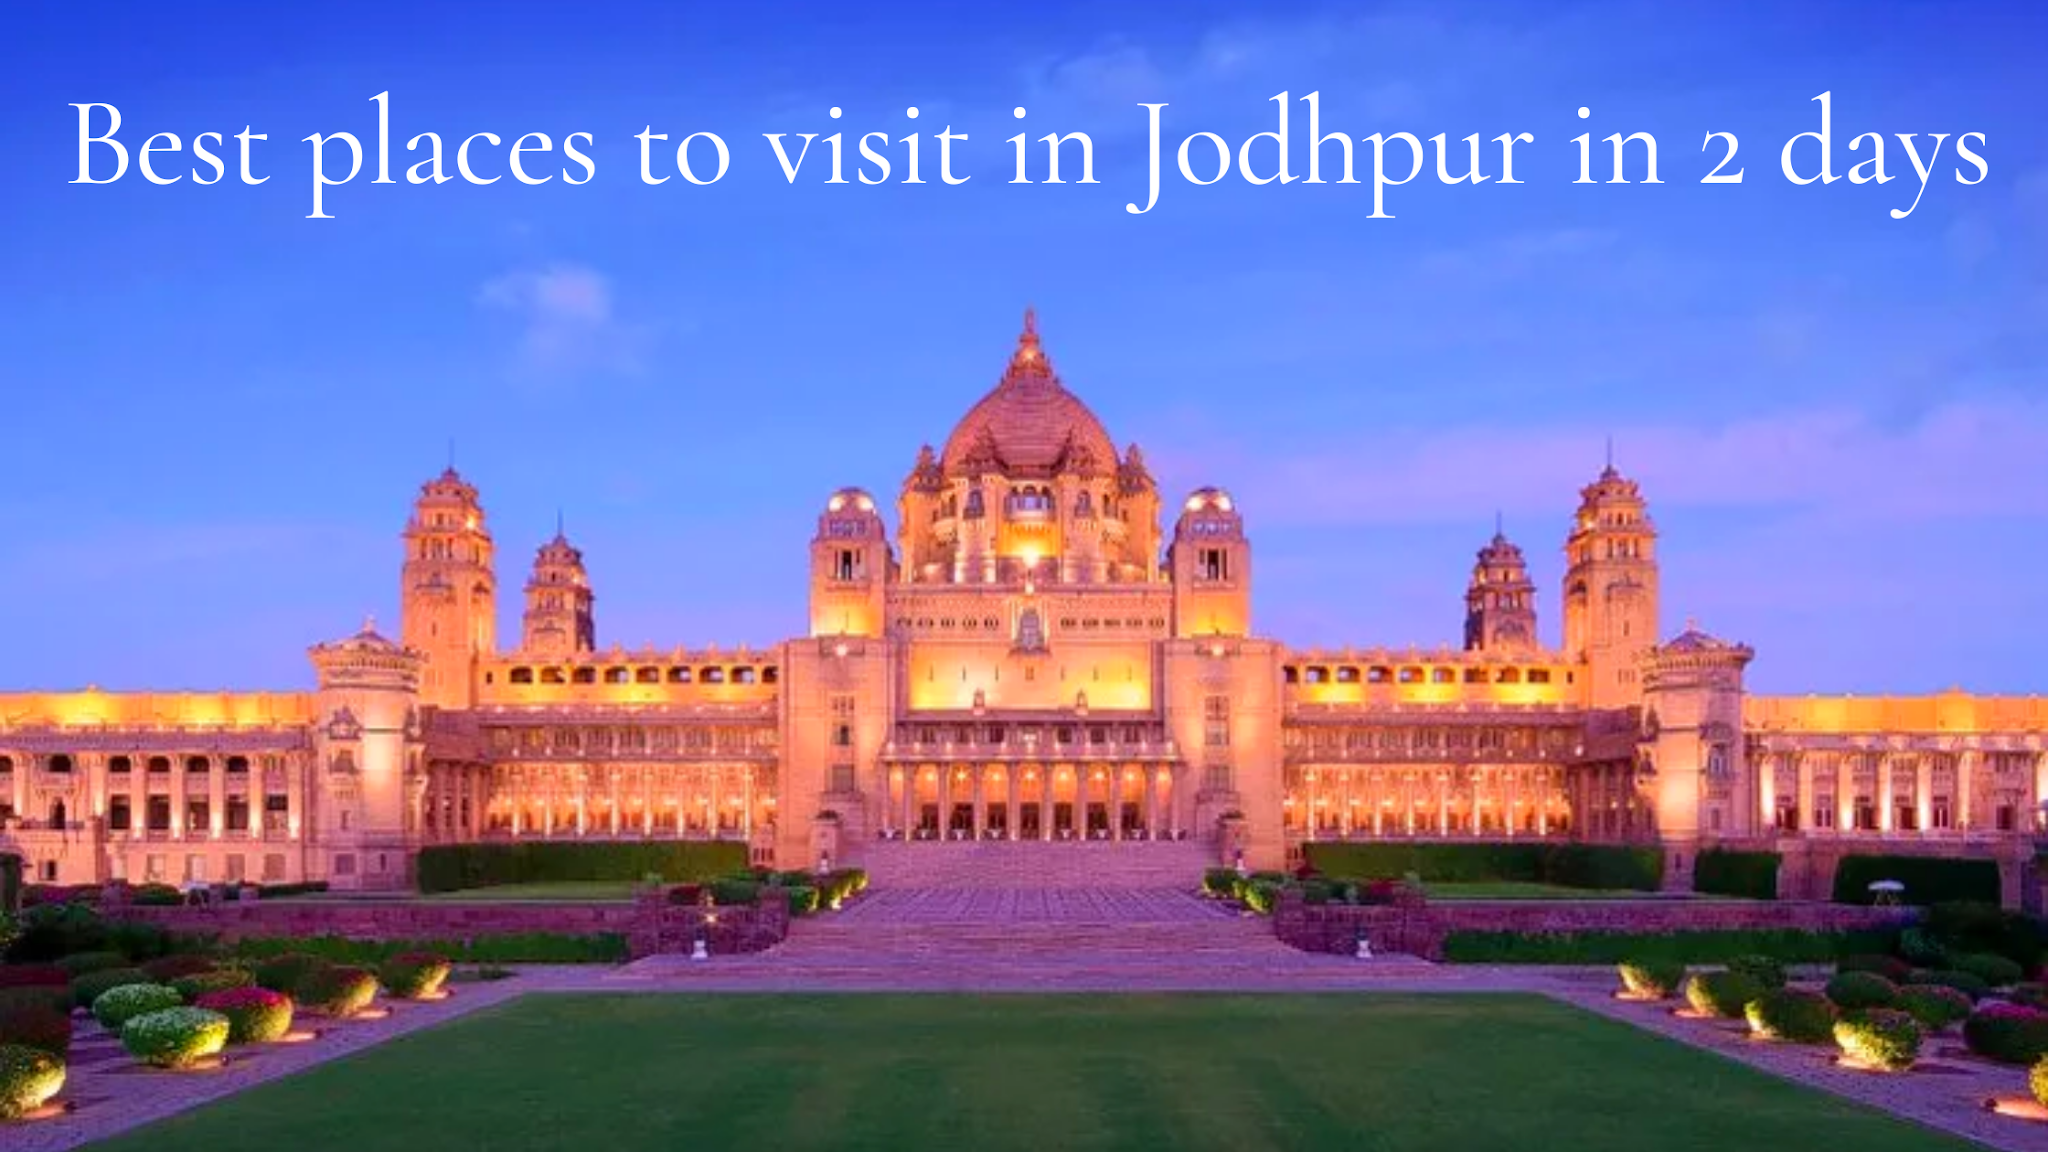 20 Places to Visit in Jodhpur in 2 Days